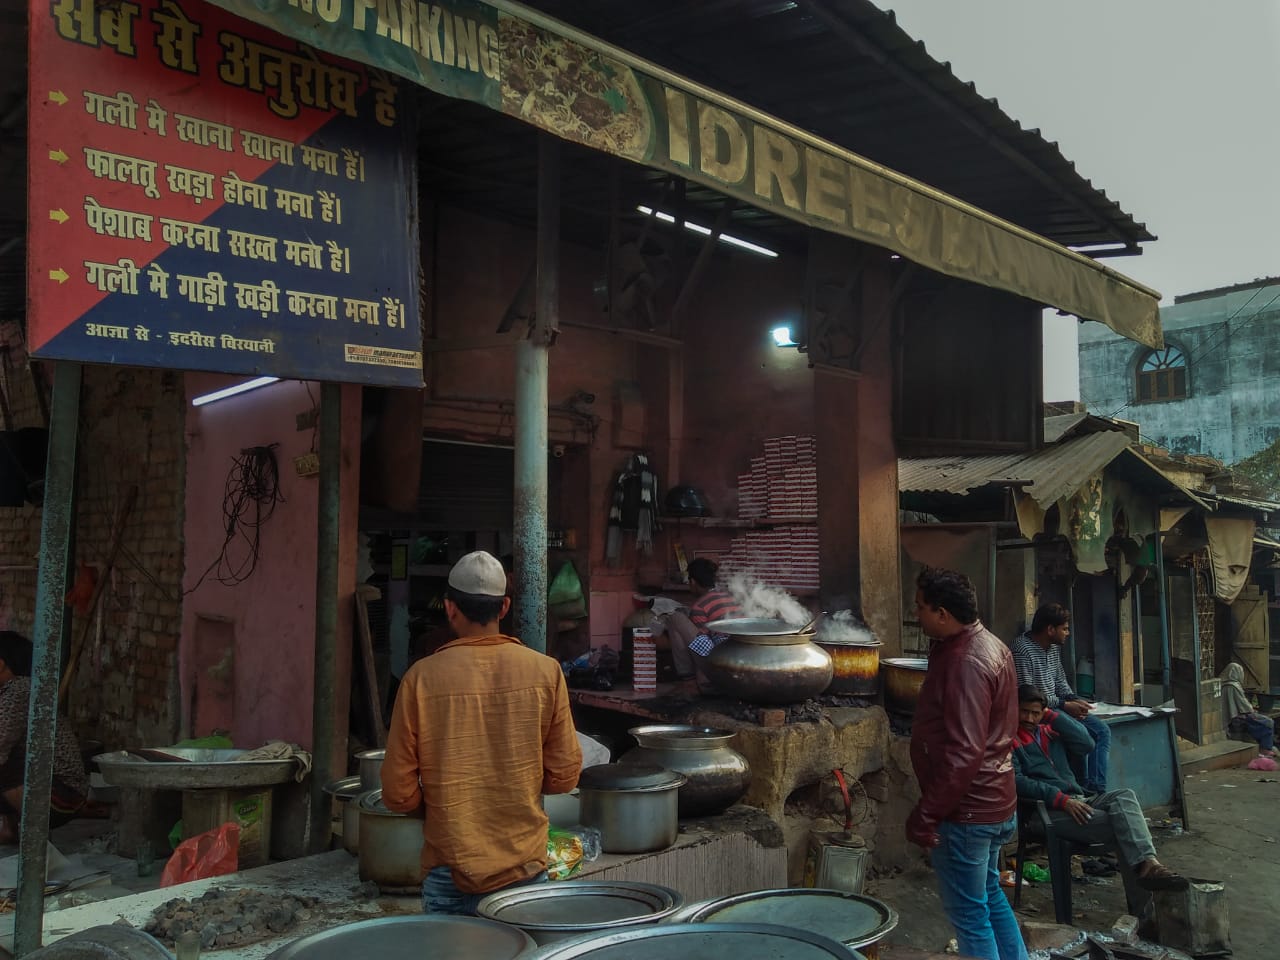 This roadside eatery serves real flavor of Biriyani in Lucknow